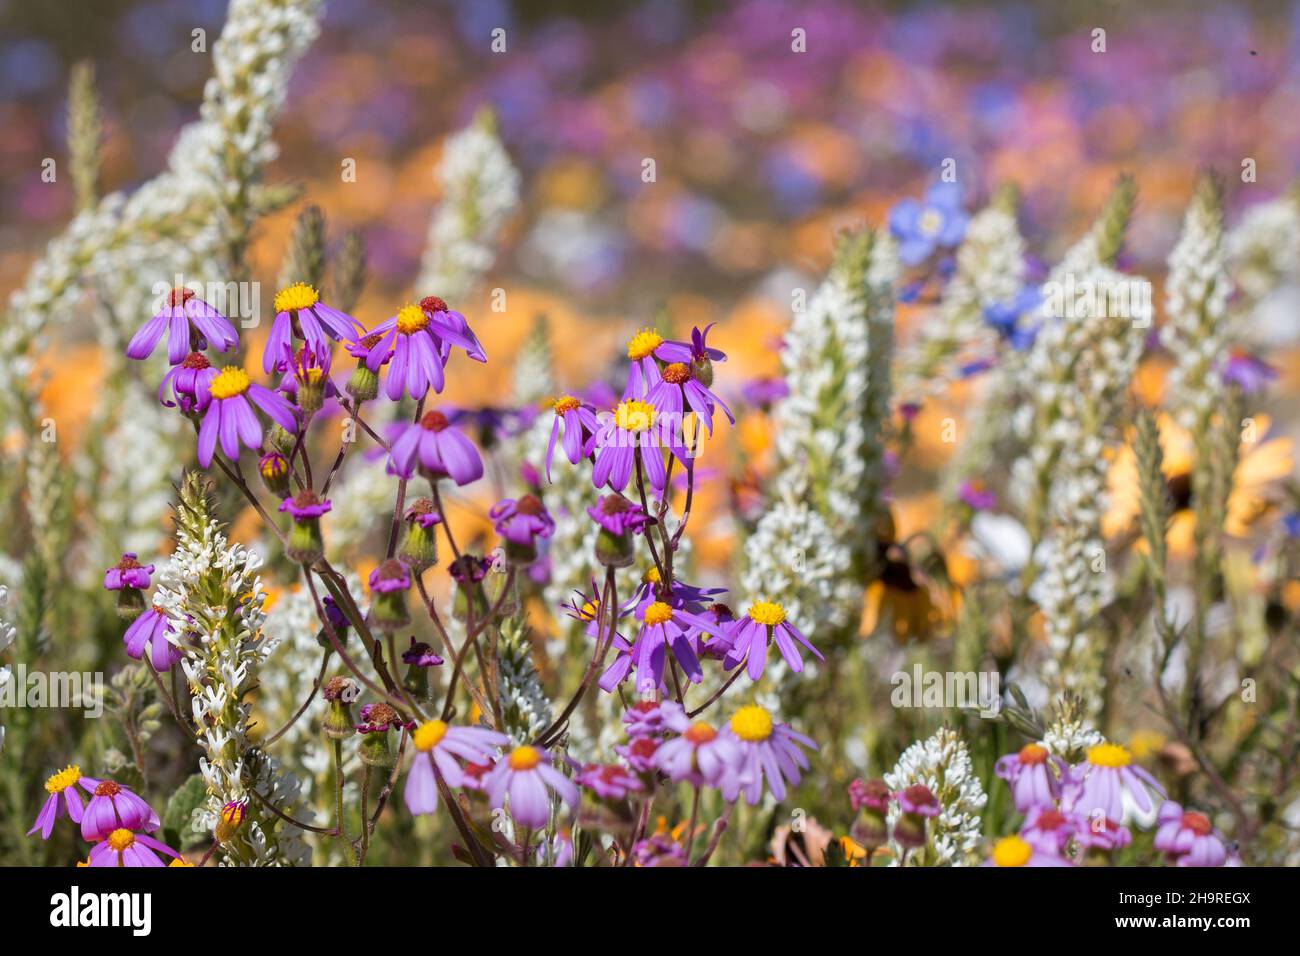 A beautiful mix of wild-growing flowers with many colors in a field Stock Photo